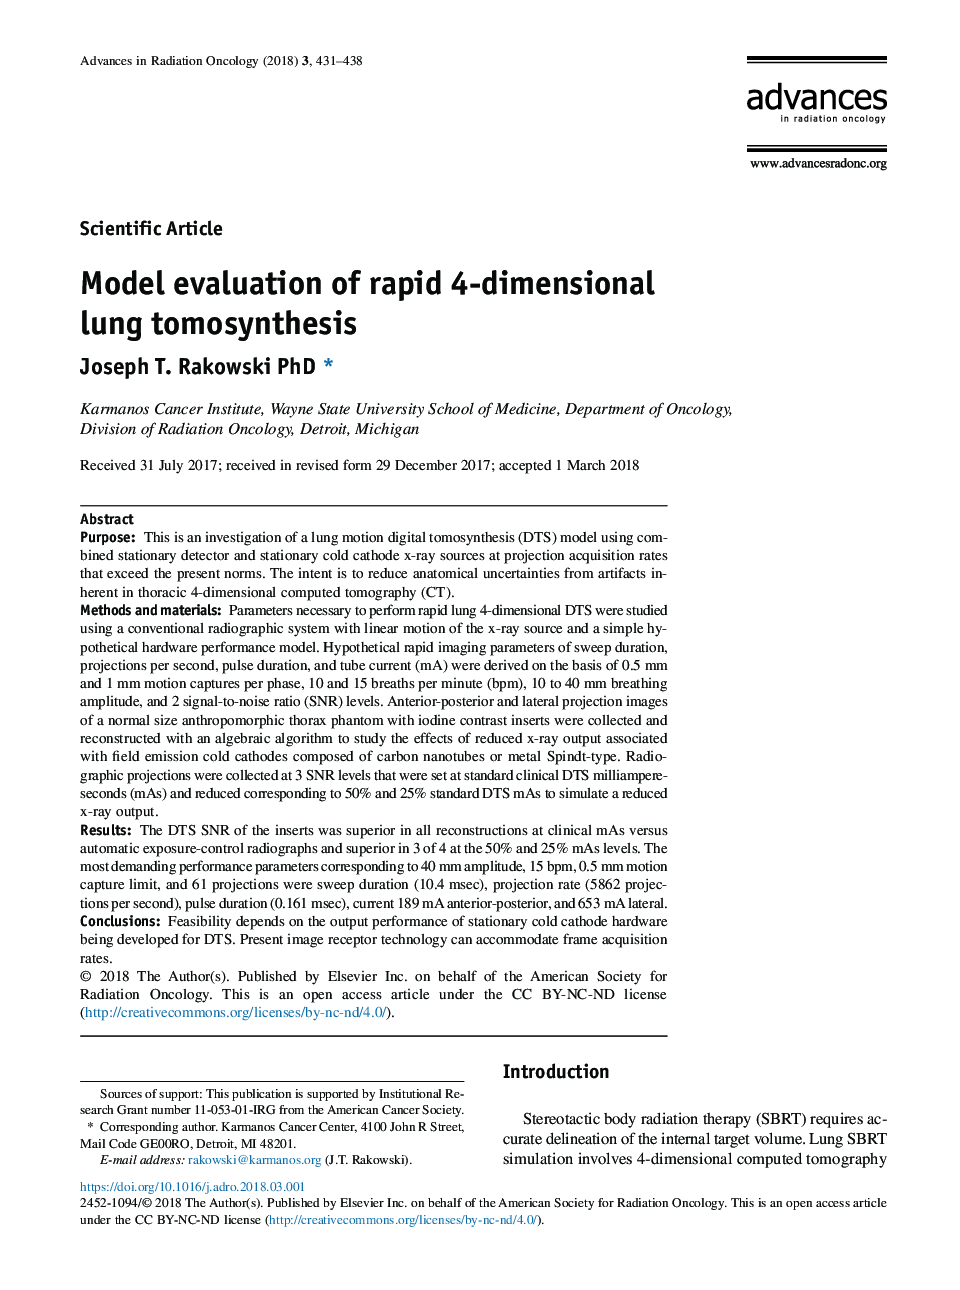 Model evaluation of rapid 4-dimensional lung tomosynthesis